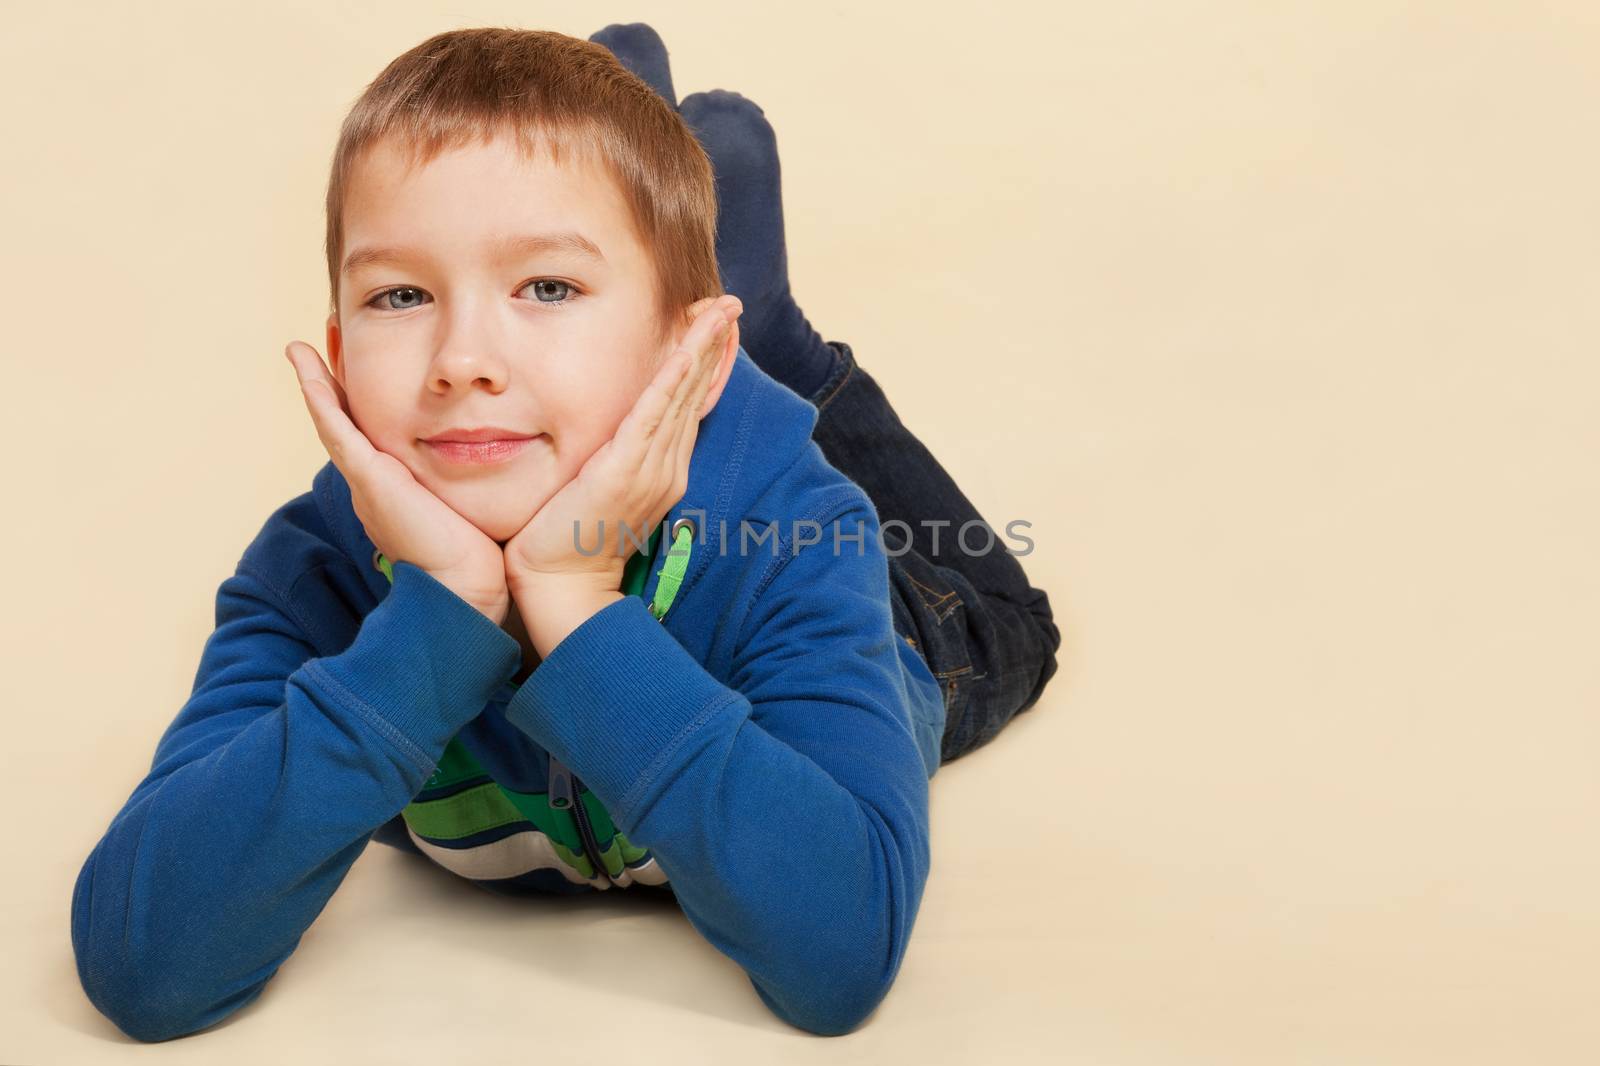 Young boy in casual cloth lying on the ground, hands on chin, smiling and looking into the camera. Youth lifestyle concept.